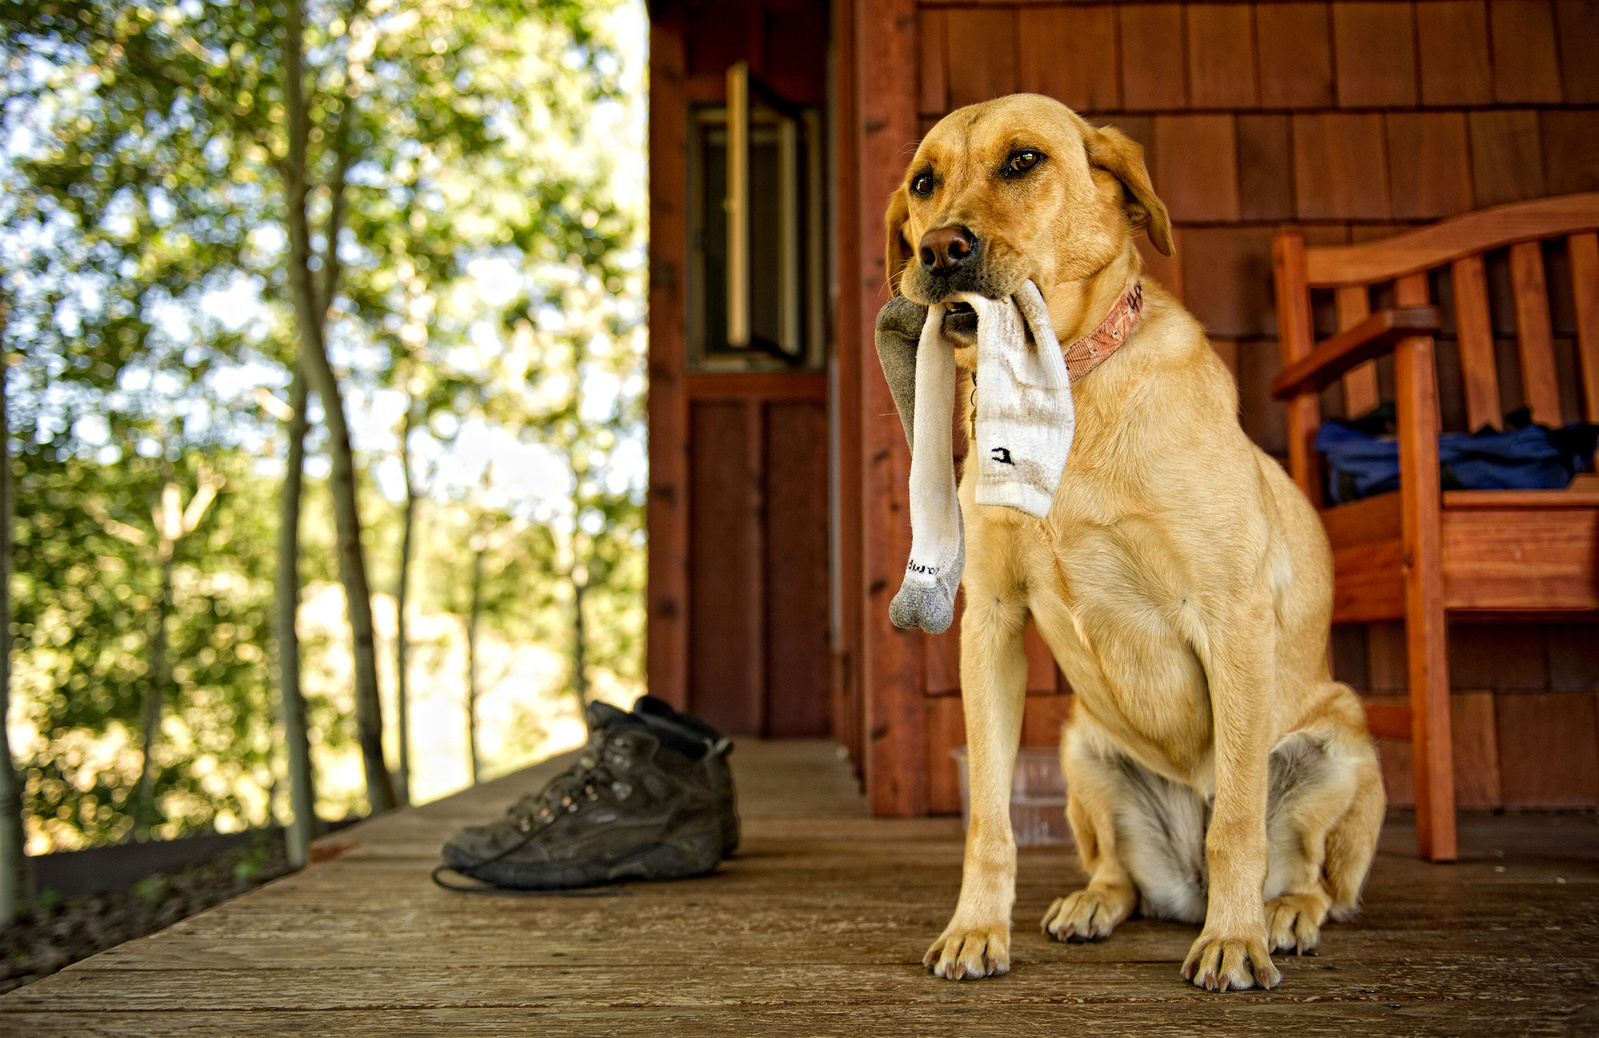 A yellow Lab sits on a porch, holding a white sock and looking right at the camera.